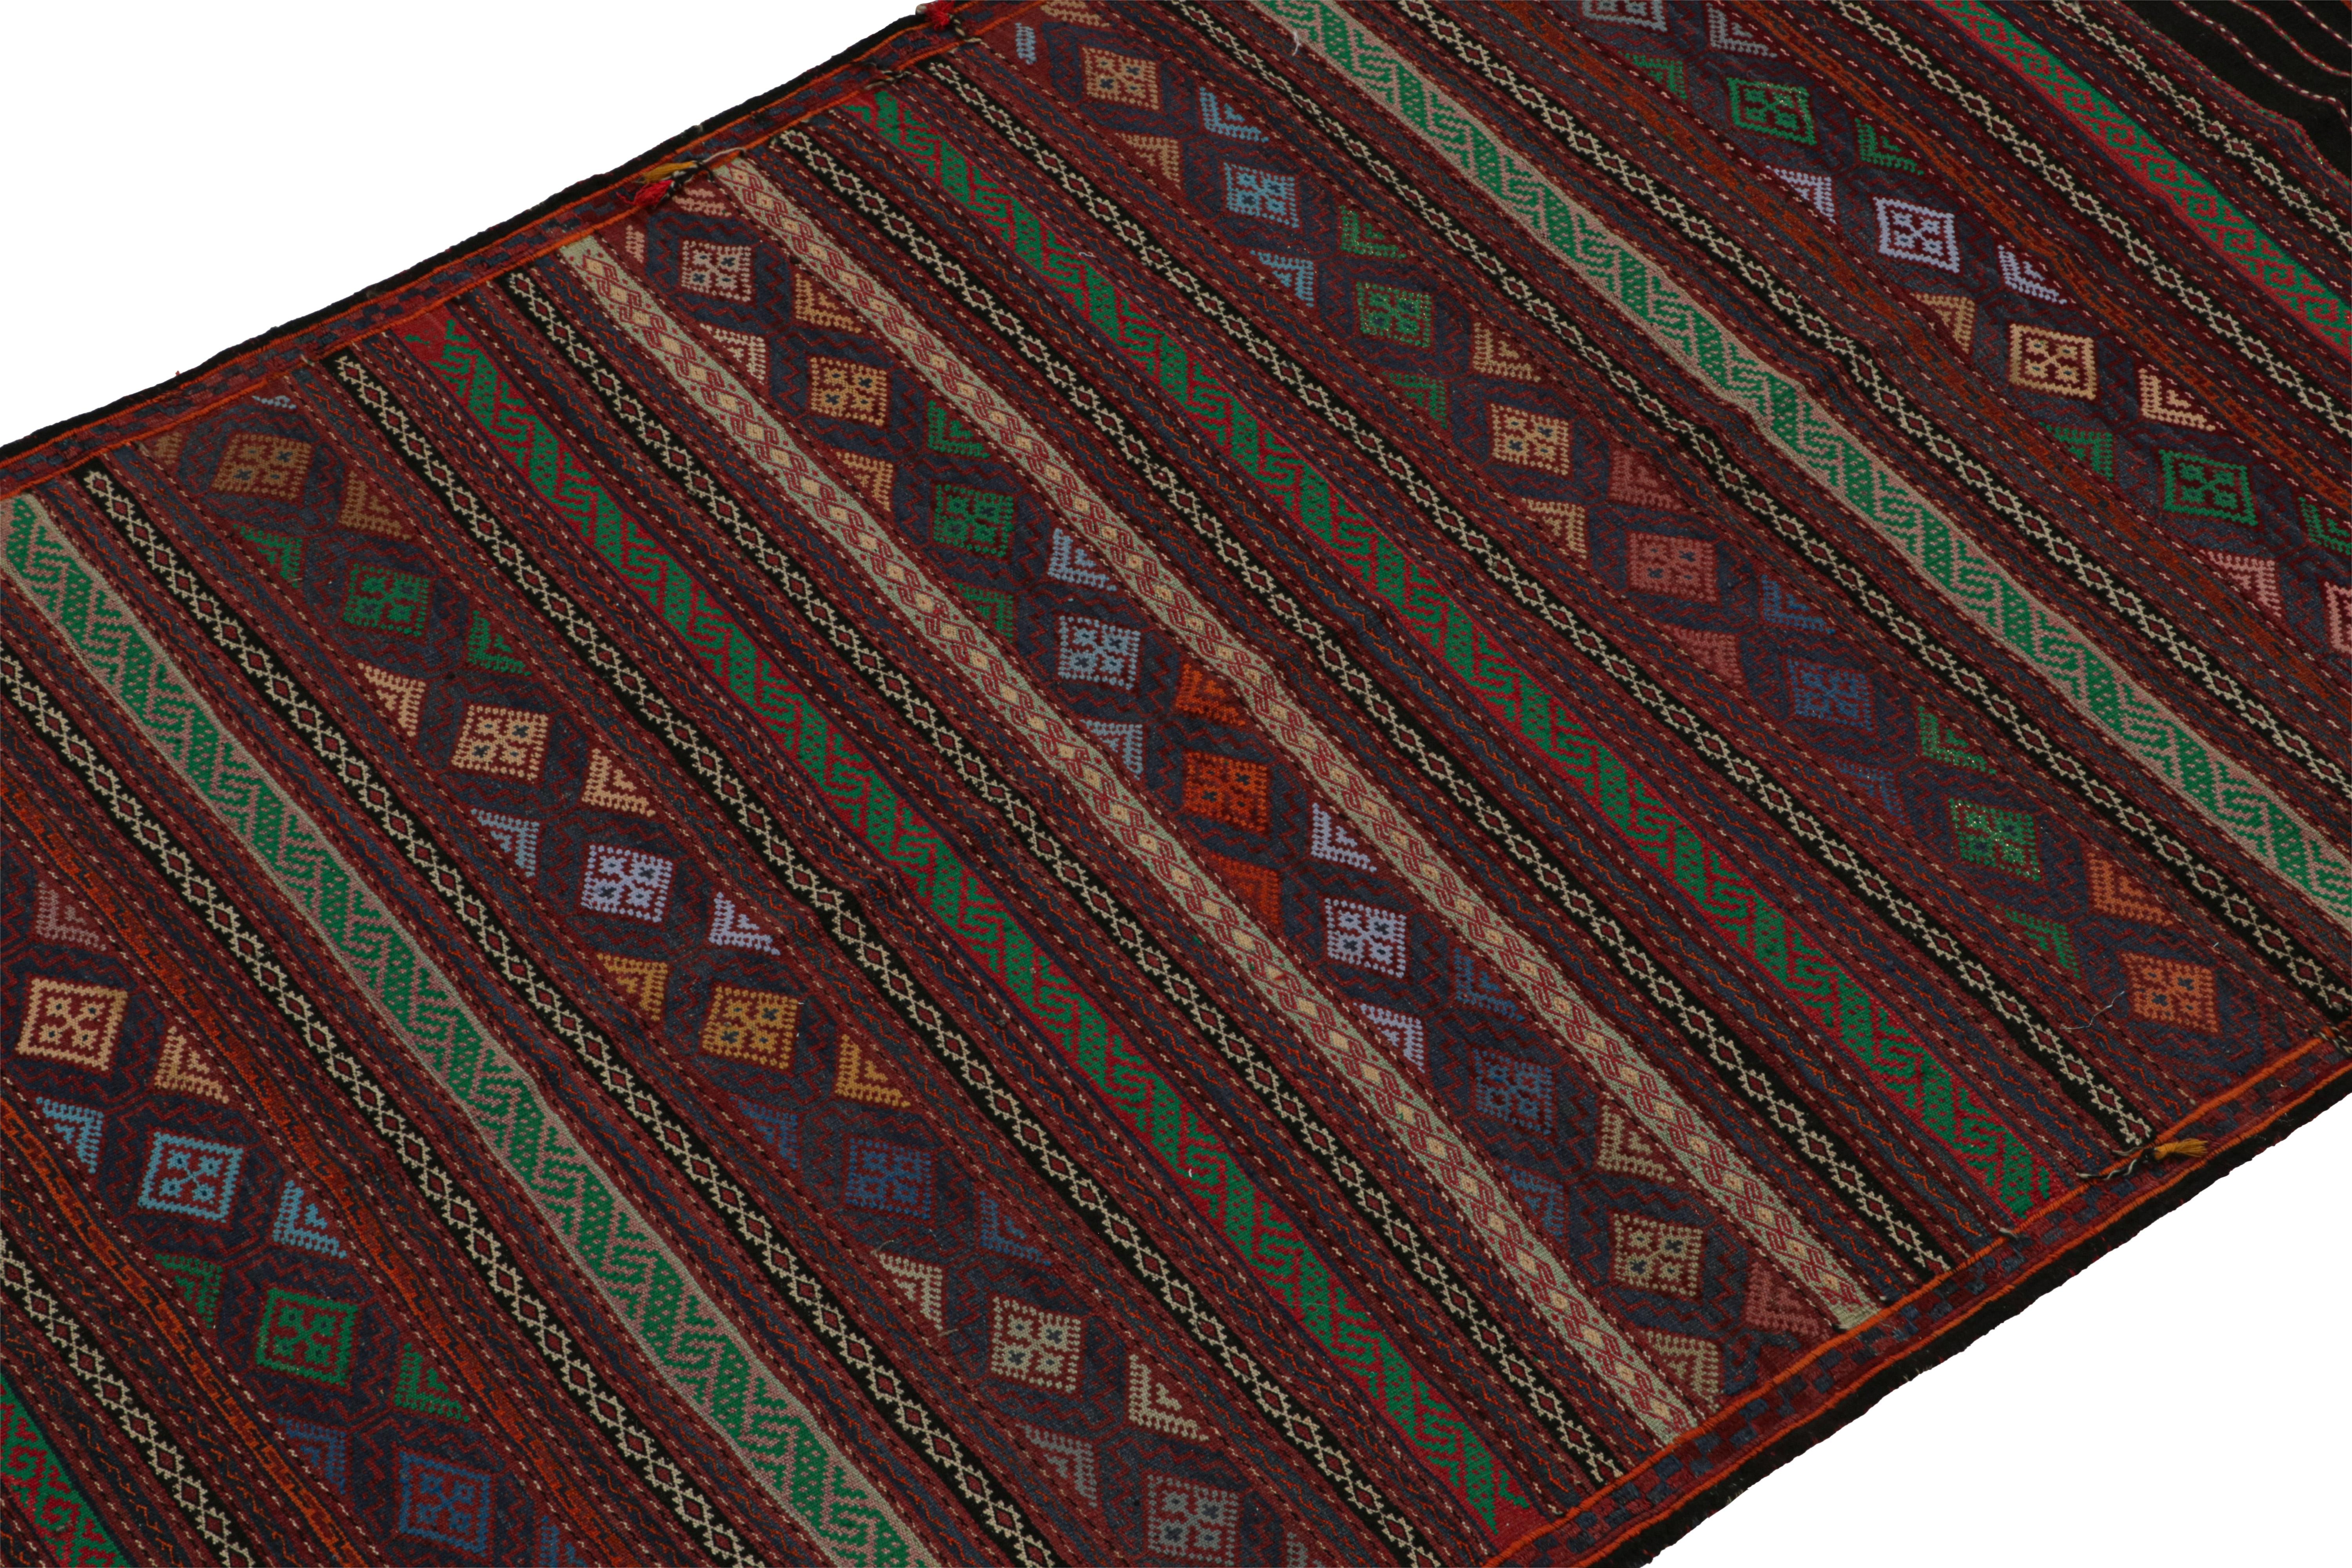 Hand-Woven Vintage Baluch Tribal Kilim with Colorful Stripes & Motifs, from Rug & Kilim For Sale